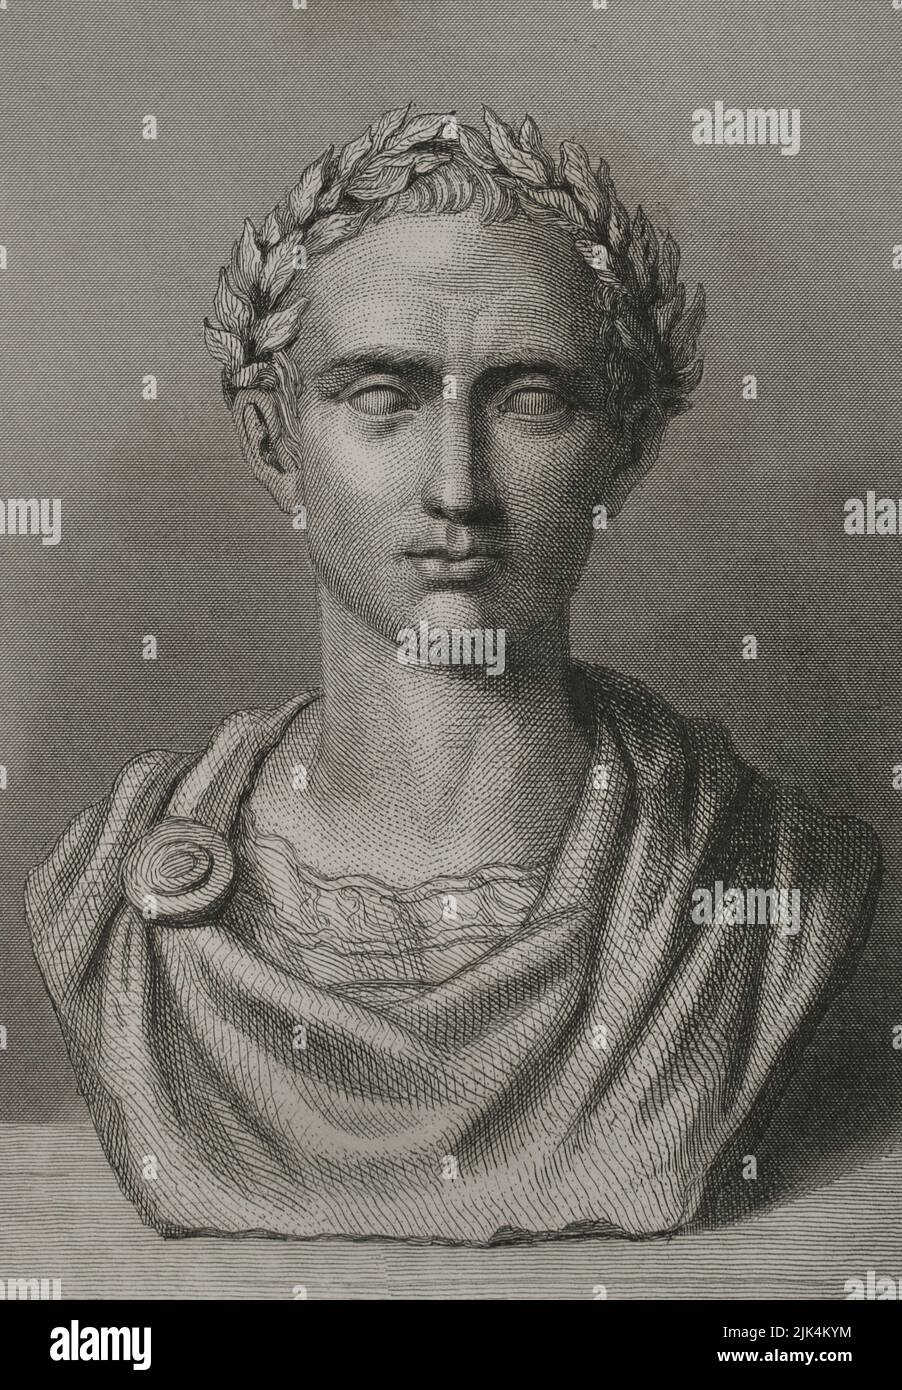 Gaius Julius Caesar (100 BC - 44 BC). Roman politician, general and writer. In 60 BC he established a triumvirate with Pompey and Crassus. Conquered Gaul. Head of the empire an dictator in perpetuity (Dictator Perpetuus). Portrait. Engraving. 'Historia Universal', by César Cantú. Volume II, 1854. Stock Photo